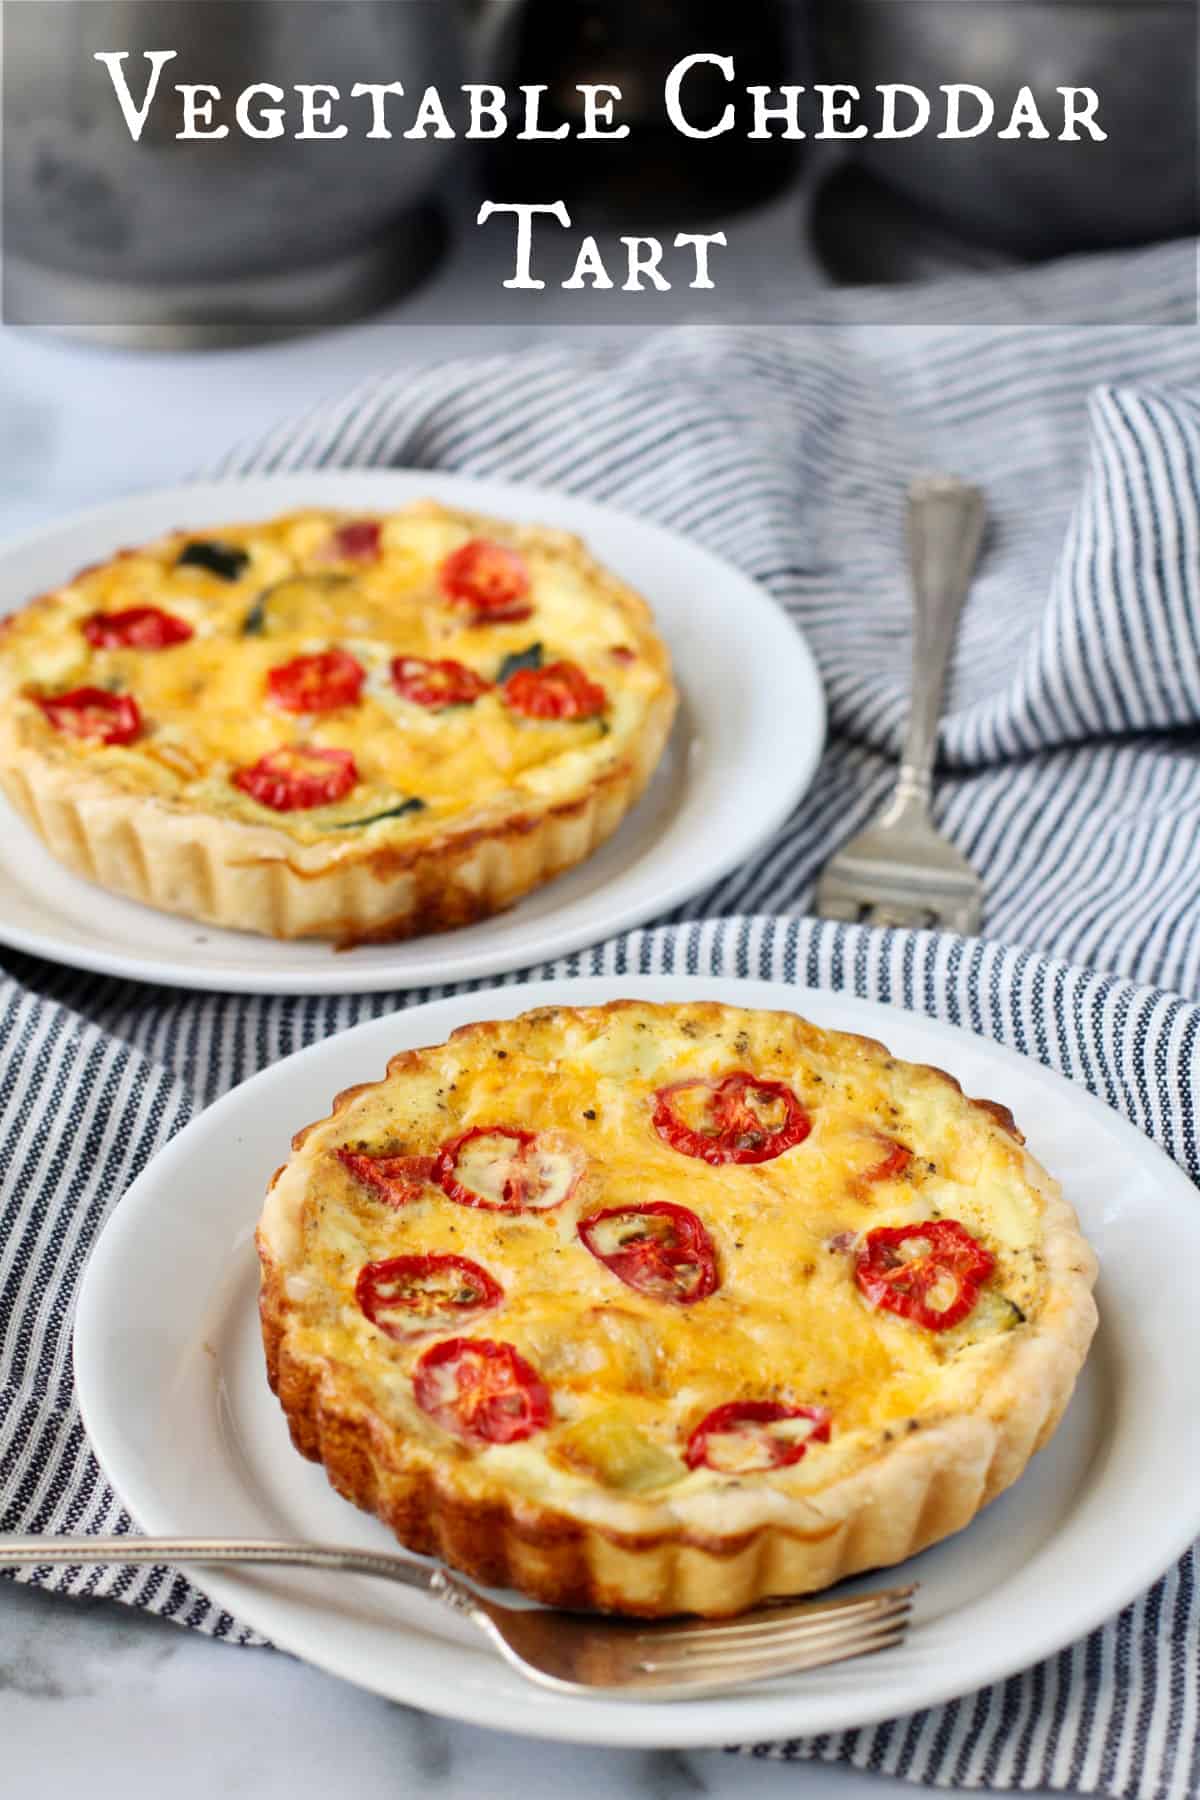 Vegetable and Cheddar Tarts on two plates